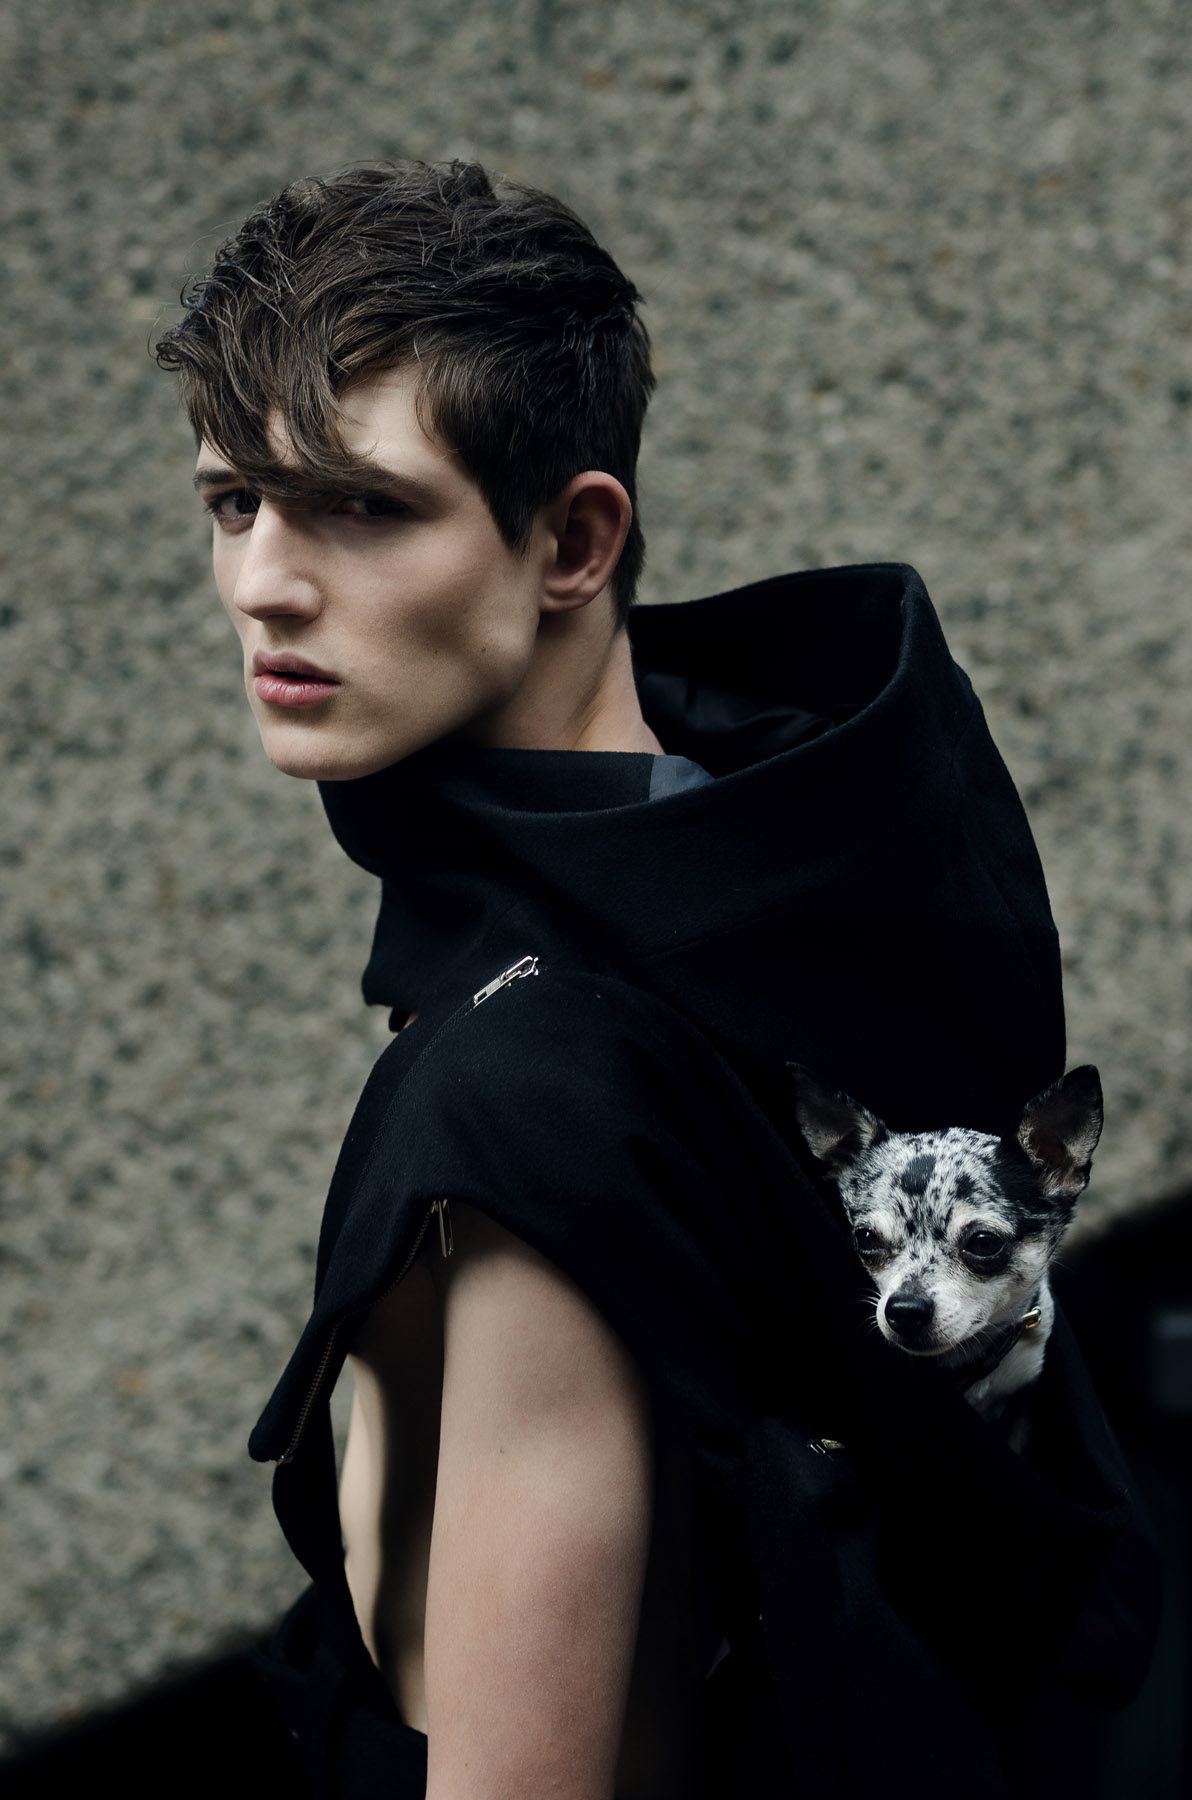 FUGITIVE by Marion Bracqué for CHASSEUR MAGAZINE